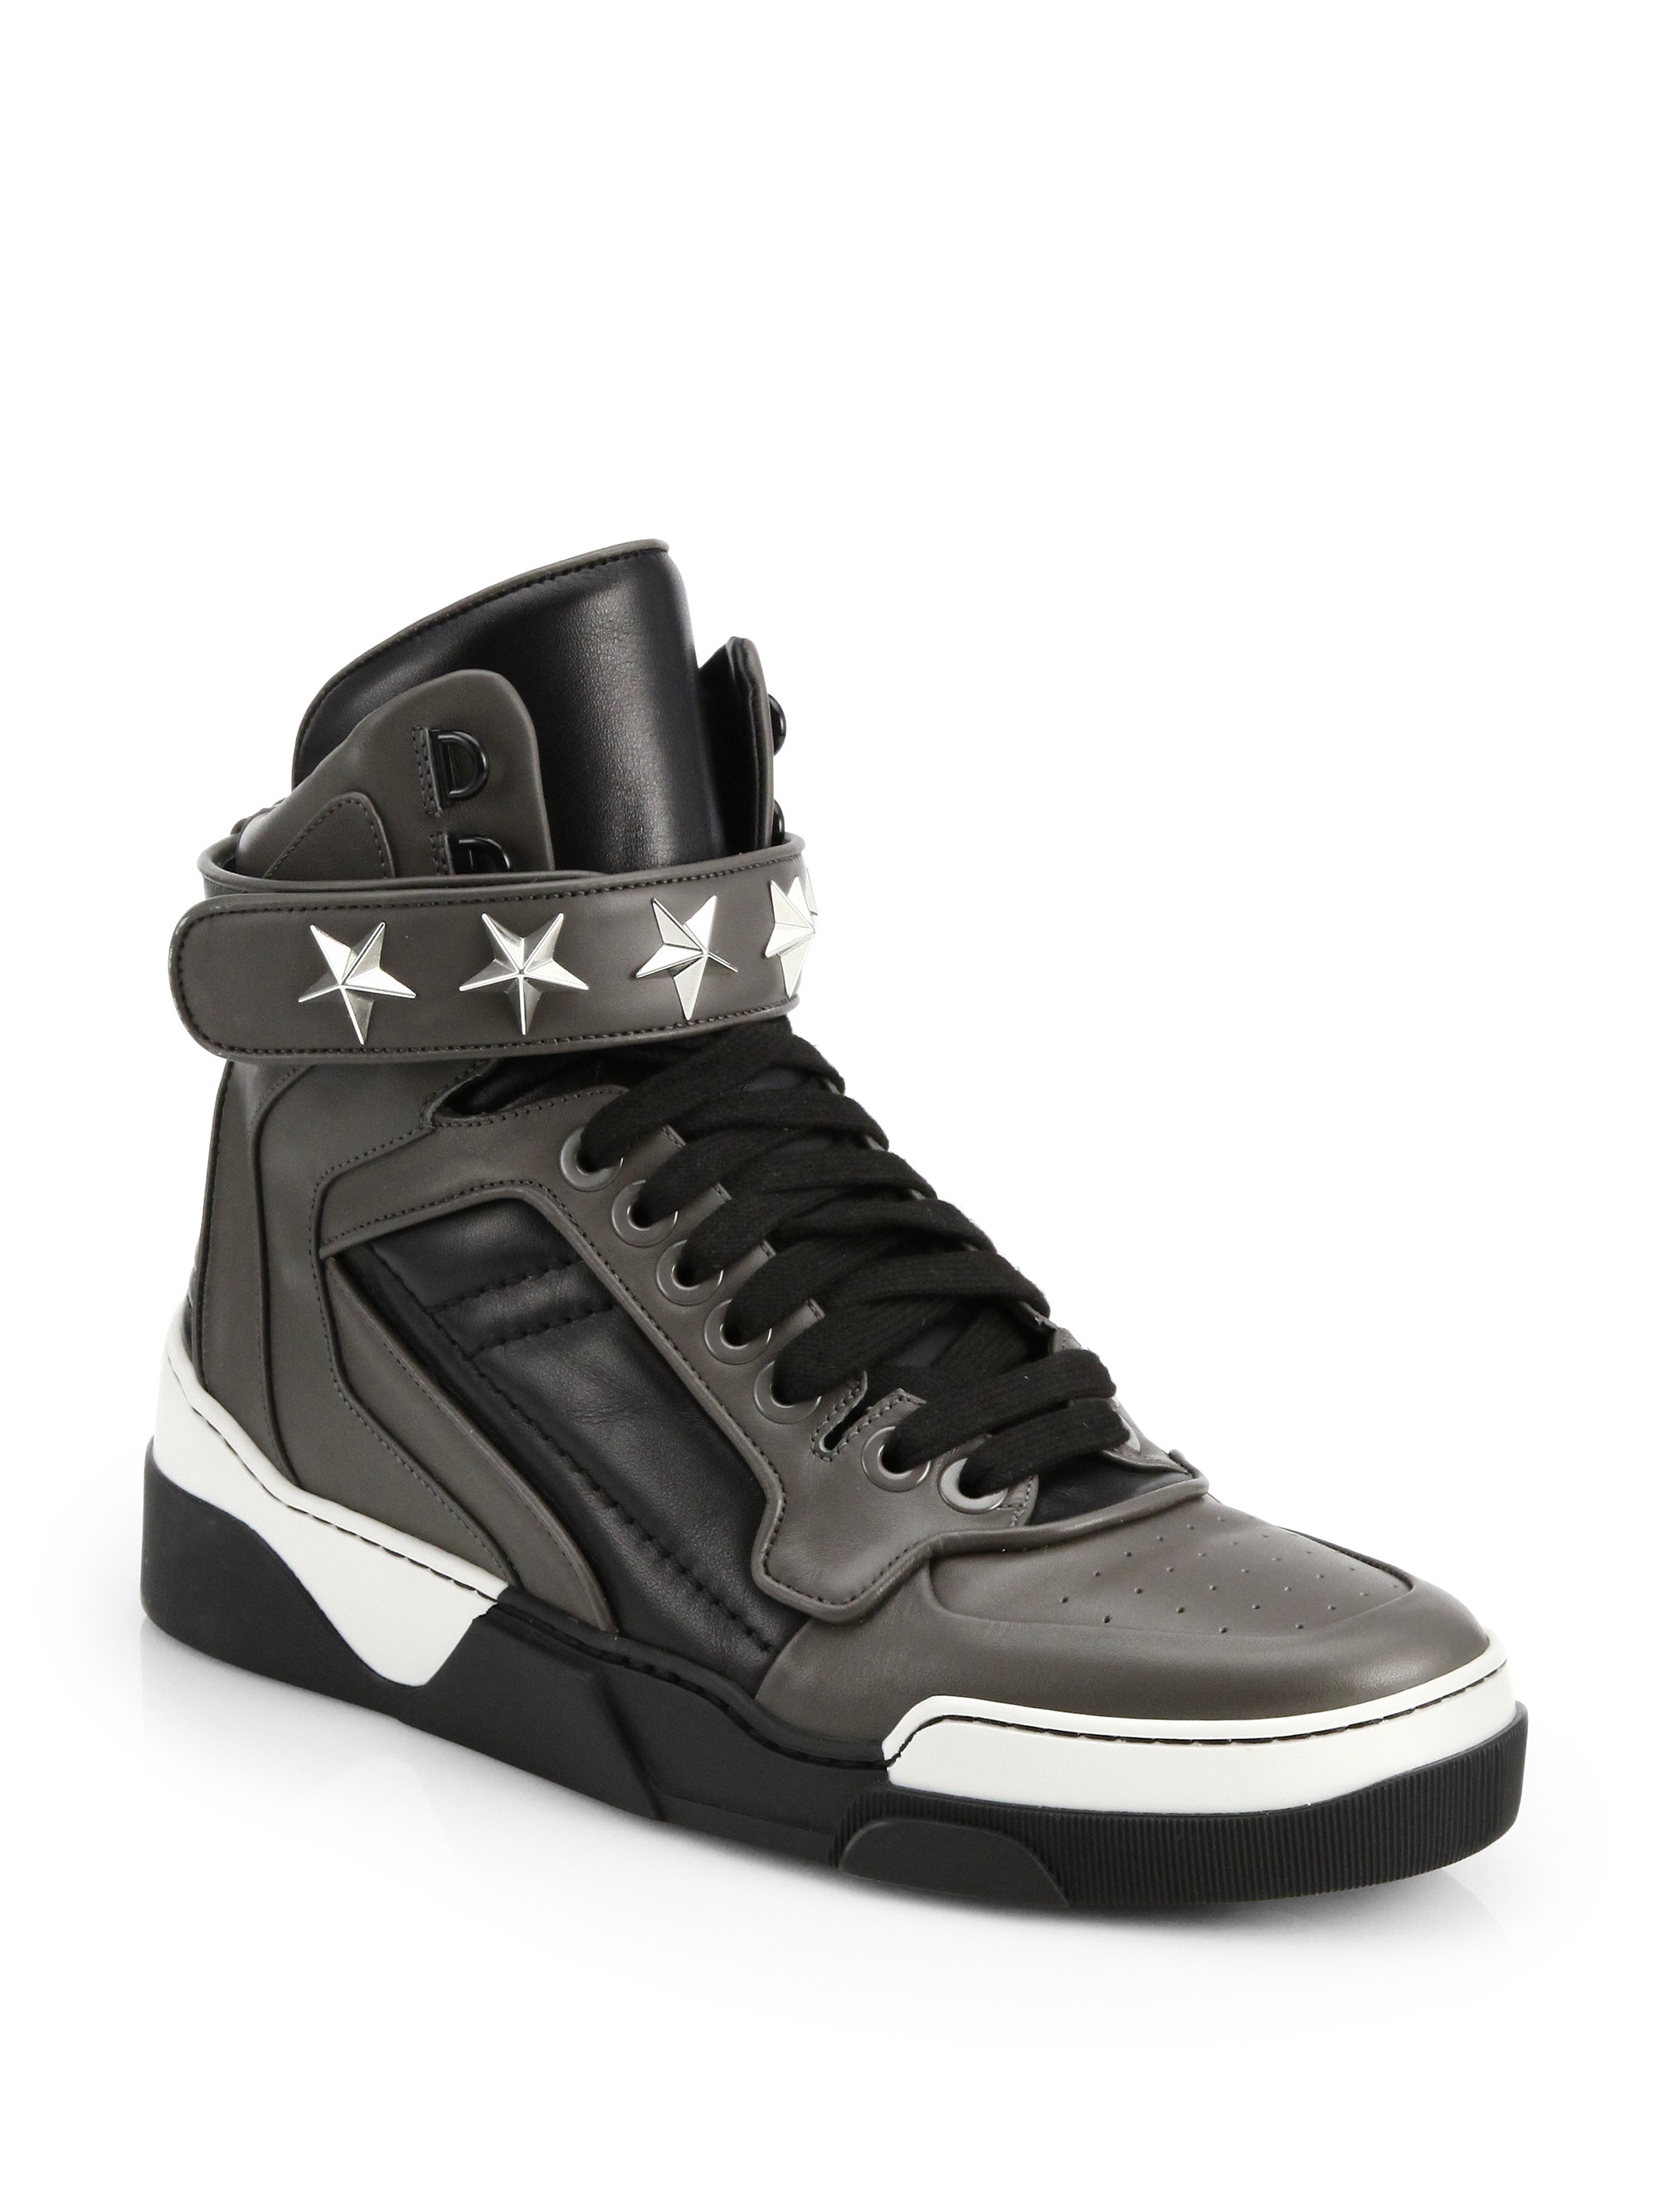 Givenchy Tyson Leather Hightop Sneakers in Gray for Men (GREY) | Lyst